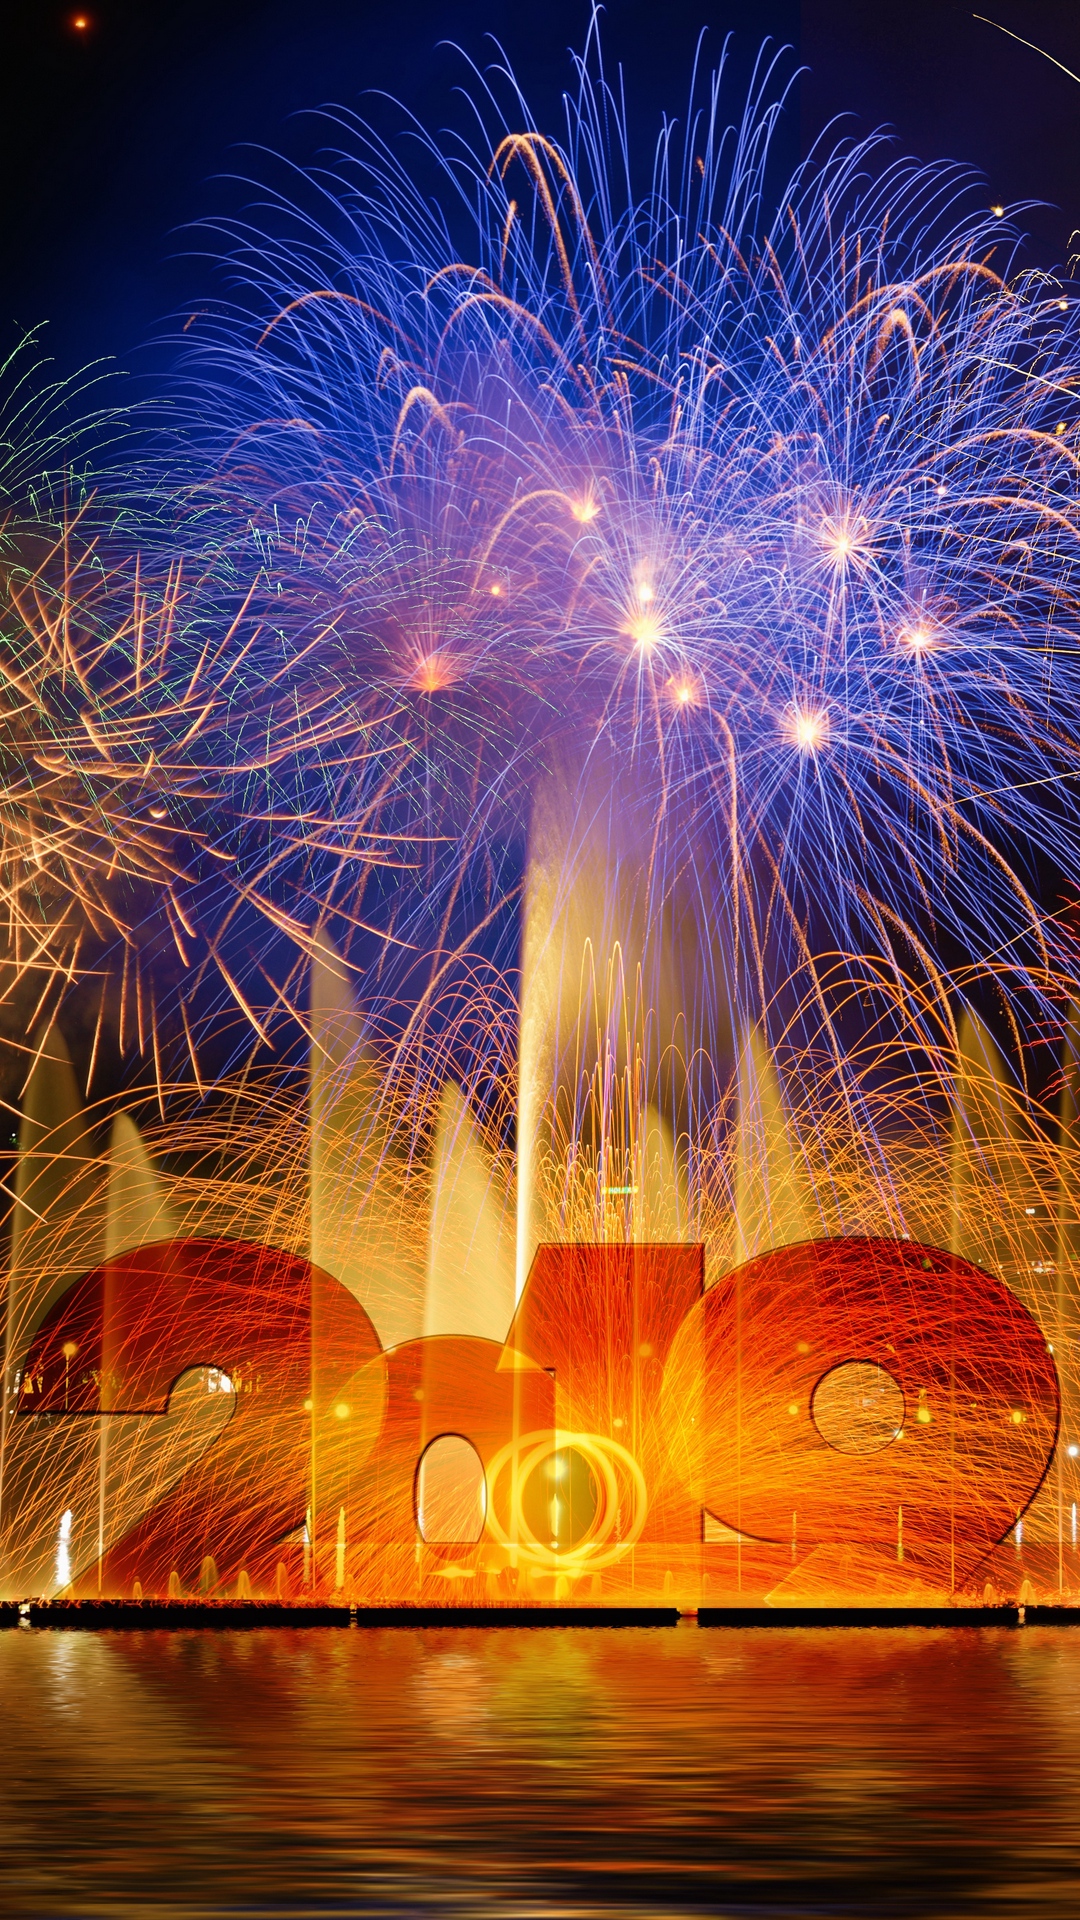 new wallpaper hd,fireworks,landmark,new years day,new year,event